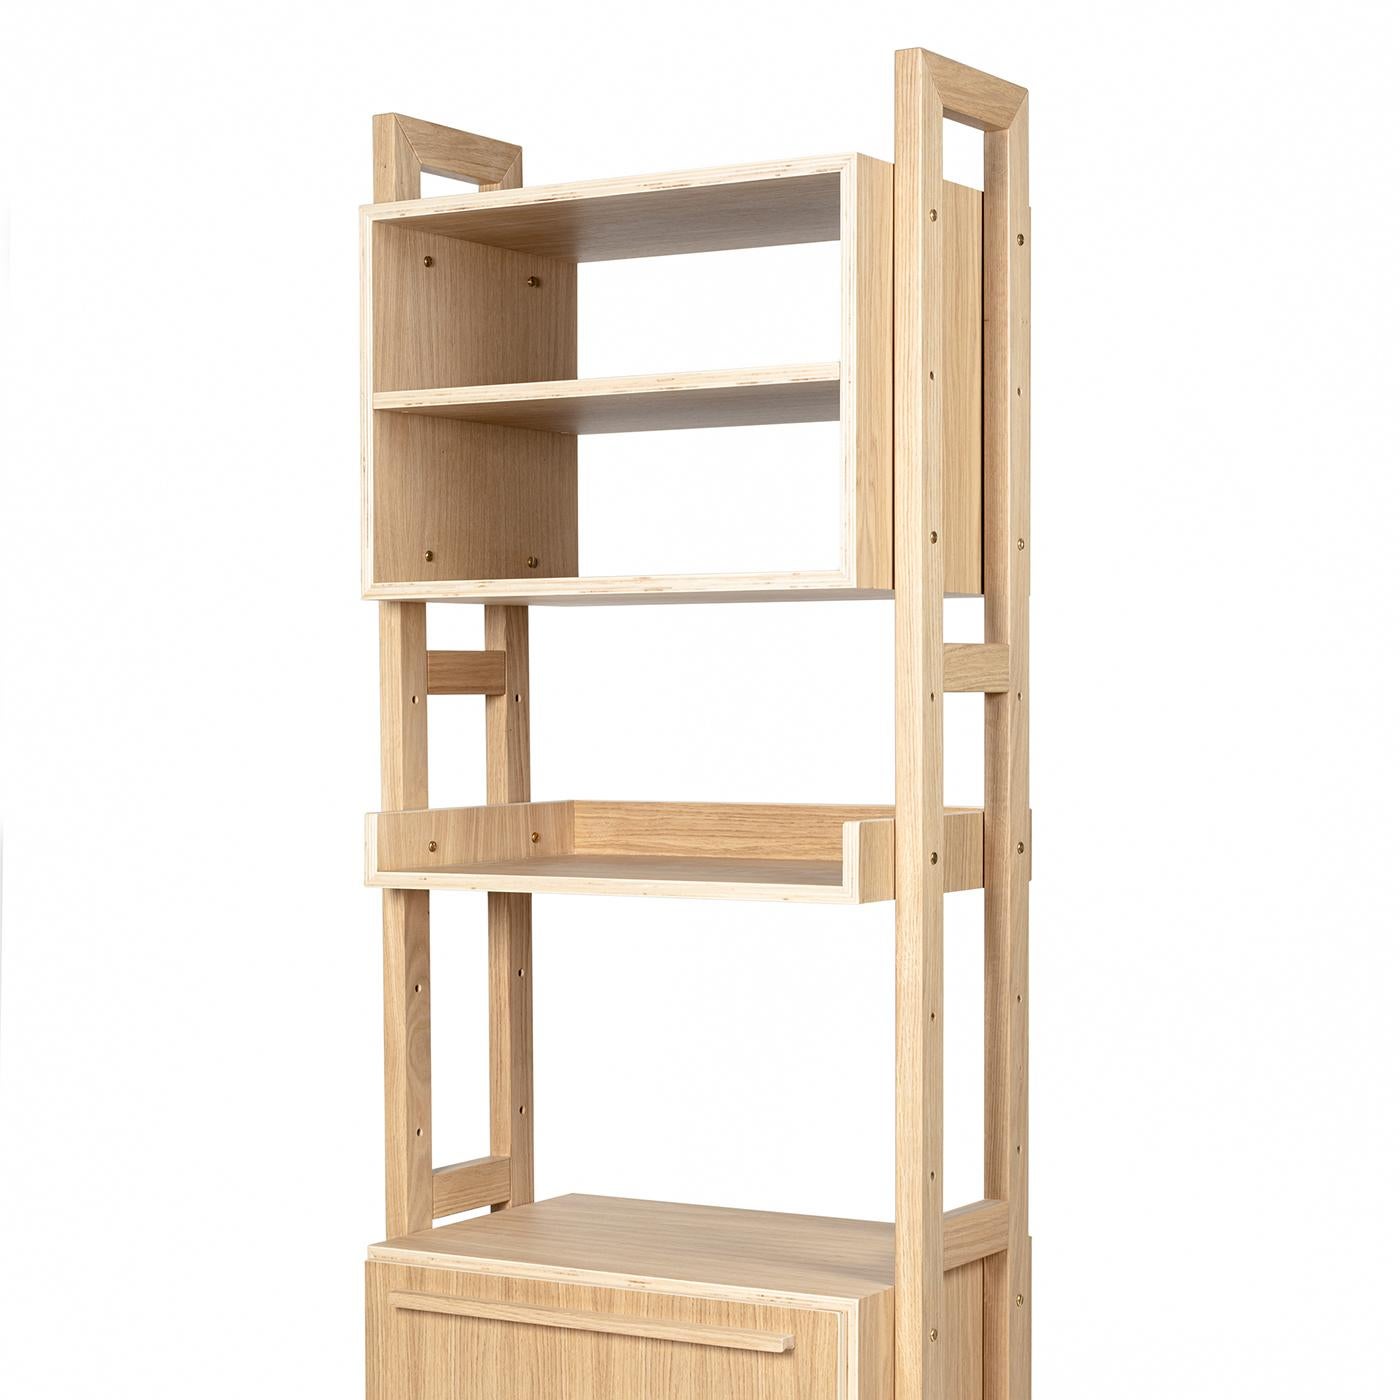 This modern, modular bookshelf has supporting sides in solid oak while its containers and shelves are in oak plywood. This piece is finished in a natural water-based paint and has holes drilled at different heights in the supporting sides to ensure